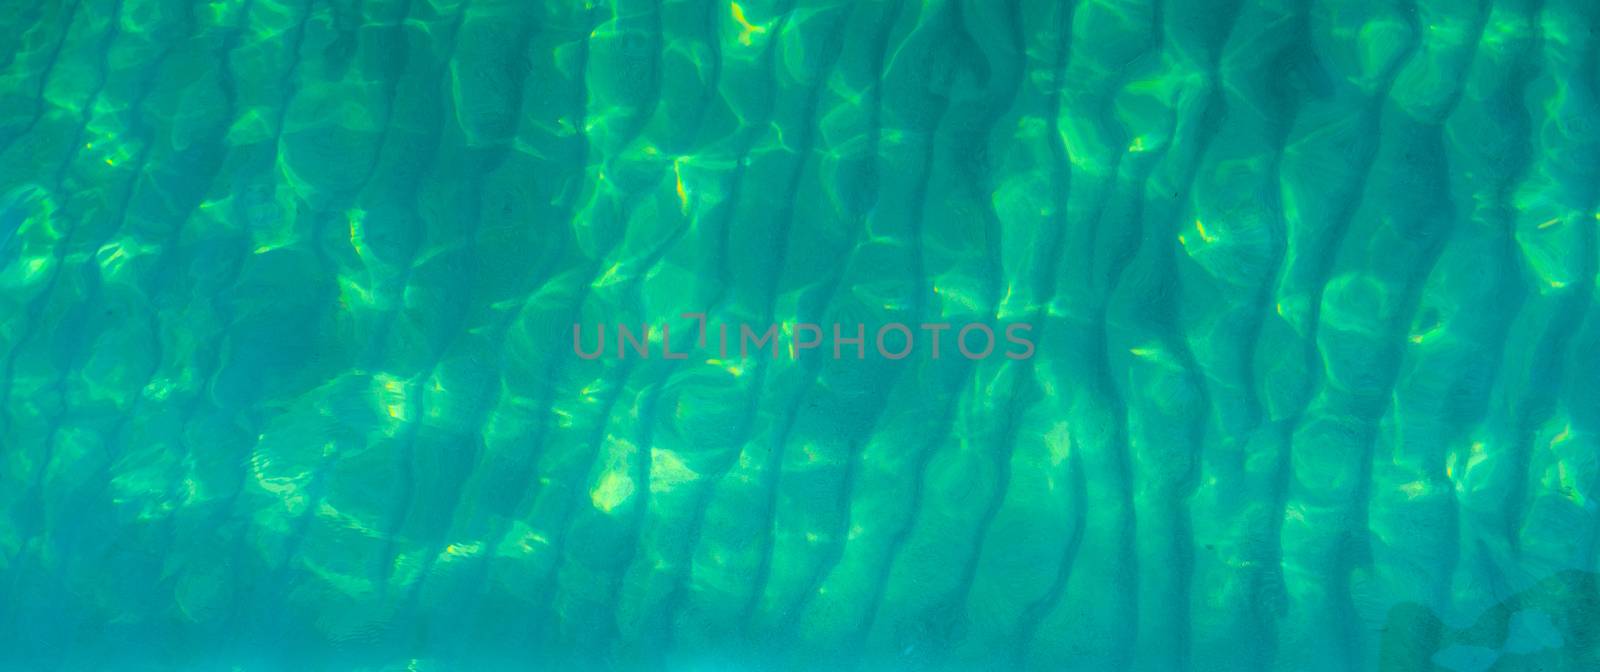 Green abstract texture background of emerald green sea water. To by Fahroni